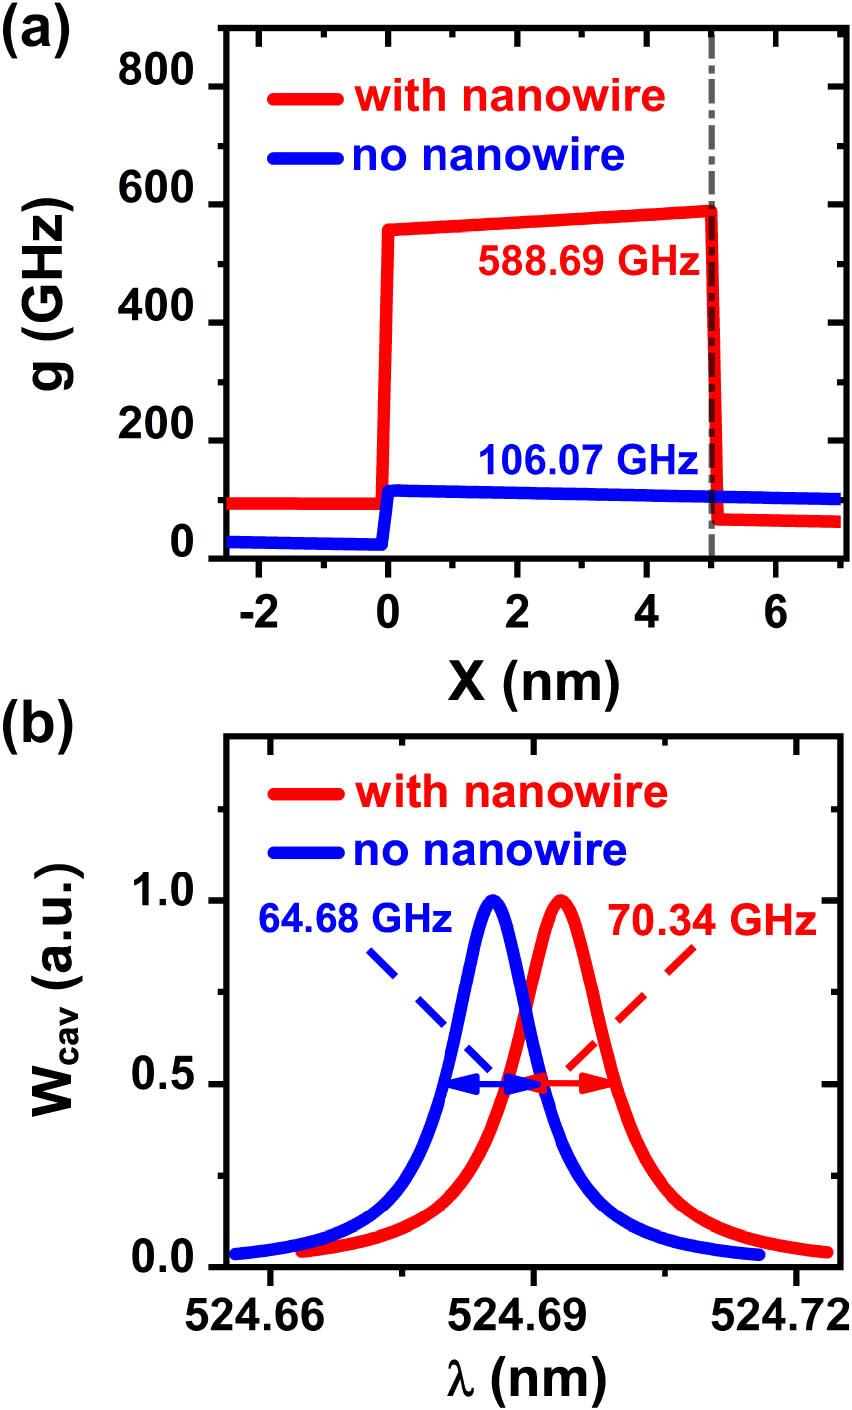 Mechanism of enhancing the coupling coefficient g and maintaining comparatively low cavity loss κ. (a) The variation of the coupling coefficient g along the X axis. g=588.69 GHz with nanowire and g=106.07 GHz without nanowire, respectively. (b) The variation of the normalized energy of the cavity modes Wcav with the wavelength λ. κ=70.34 GHz with nanowire and κ=64.68 GHz without nanowire, respectively.